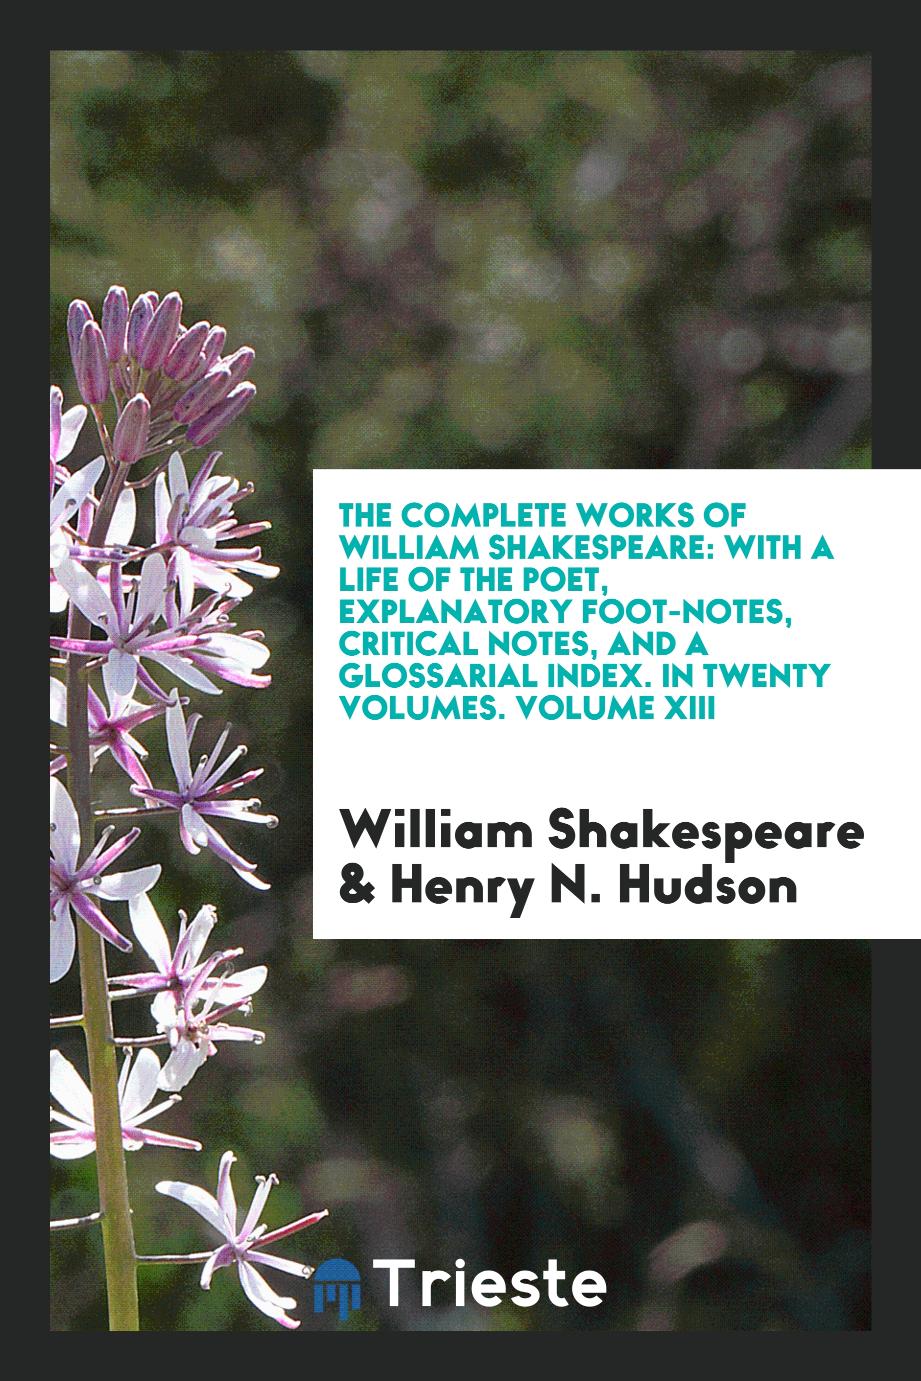 The complete works of William Shakespeare: with a life of the poet, explanatory foot-notes, critical notes, and a glossarial index. In twenty volumes. Volume XIII